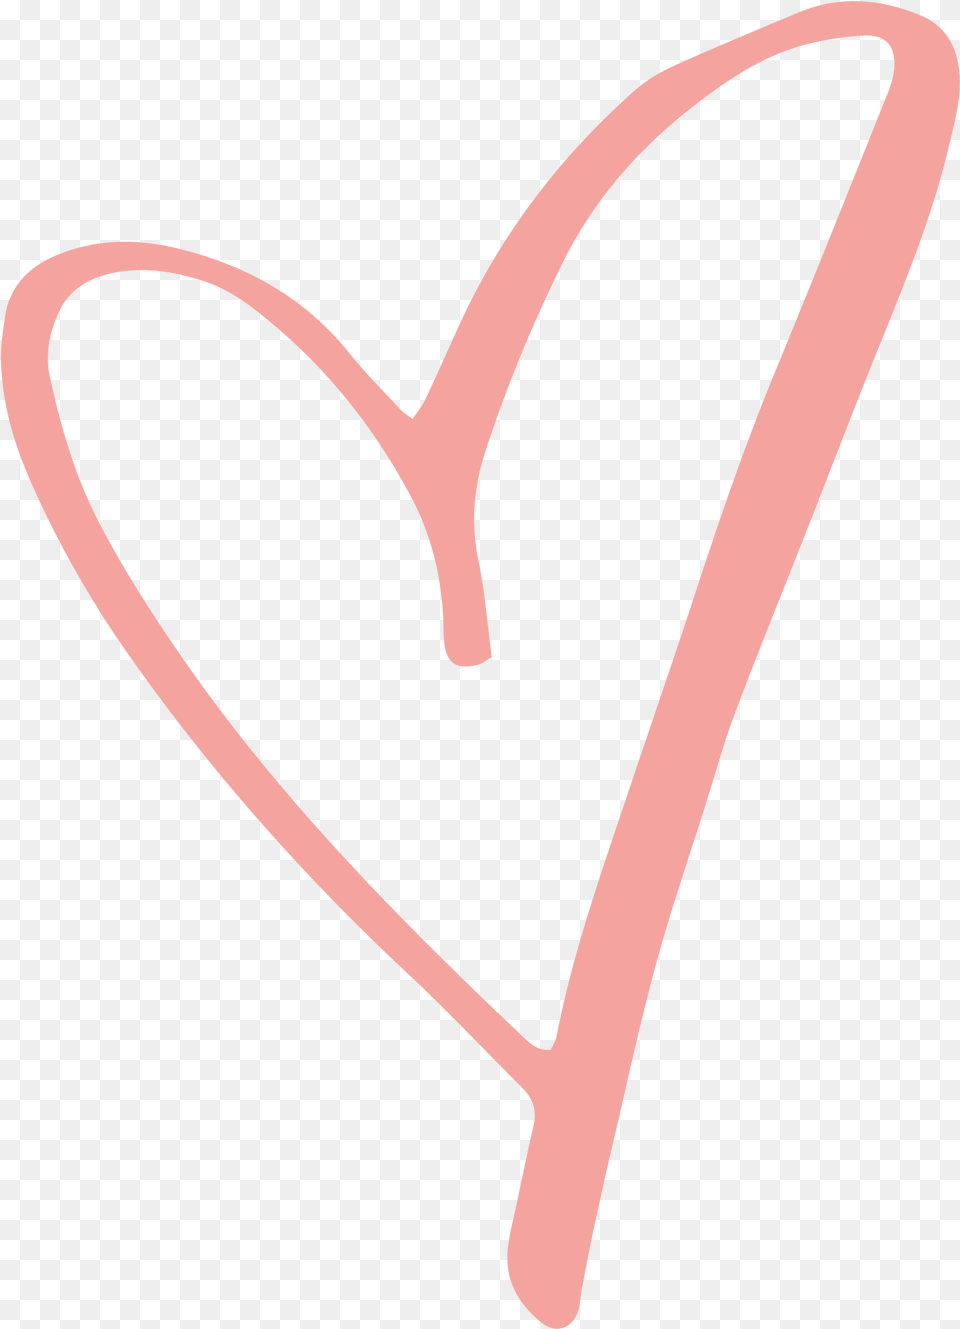 Rustic Heart Transparent Background Pink Heart Outline, Clothing, Hat, Bow, Weapon Png